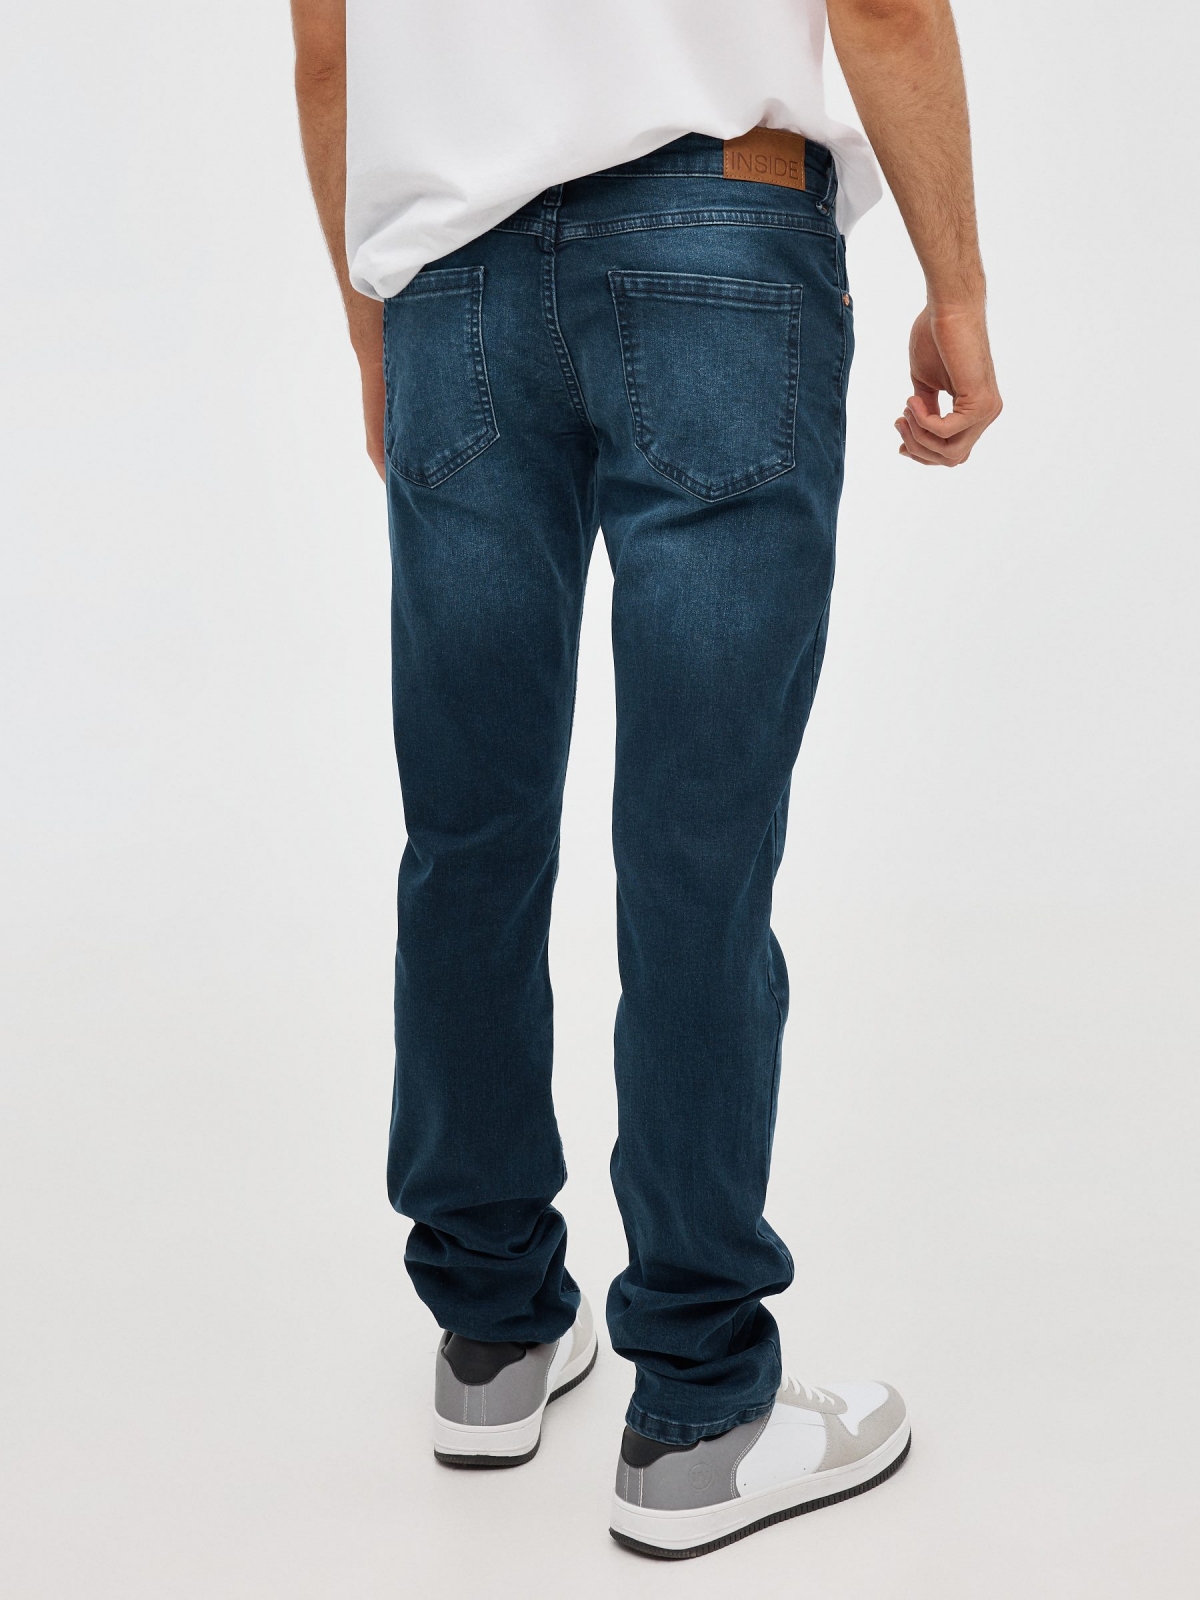 Basic jeans blue middle back view